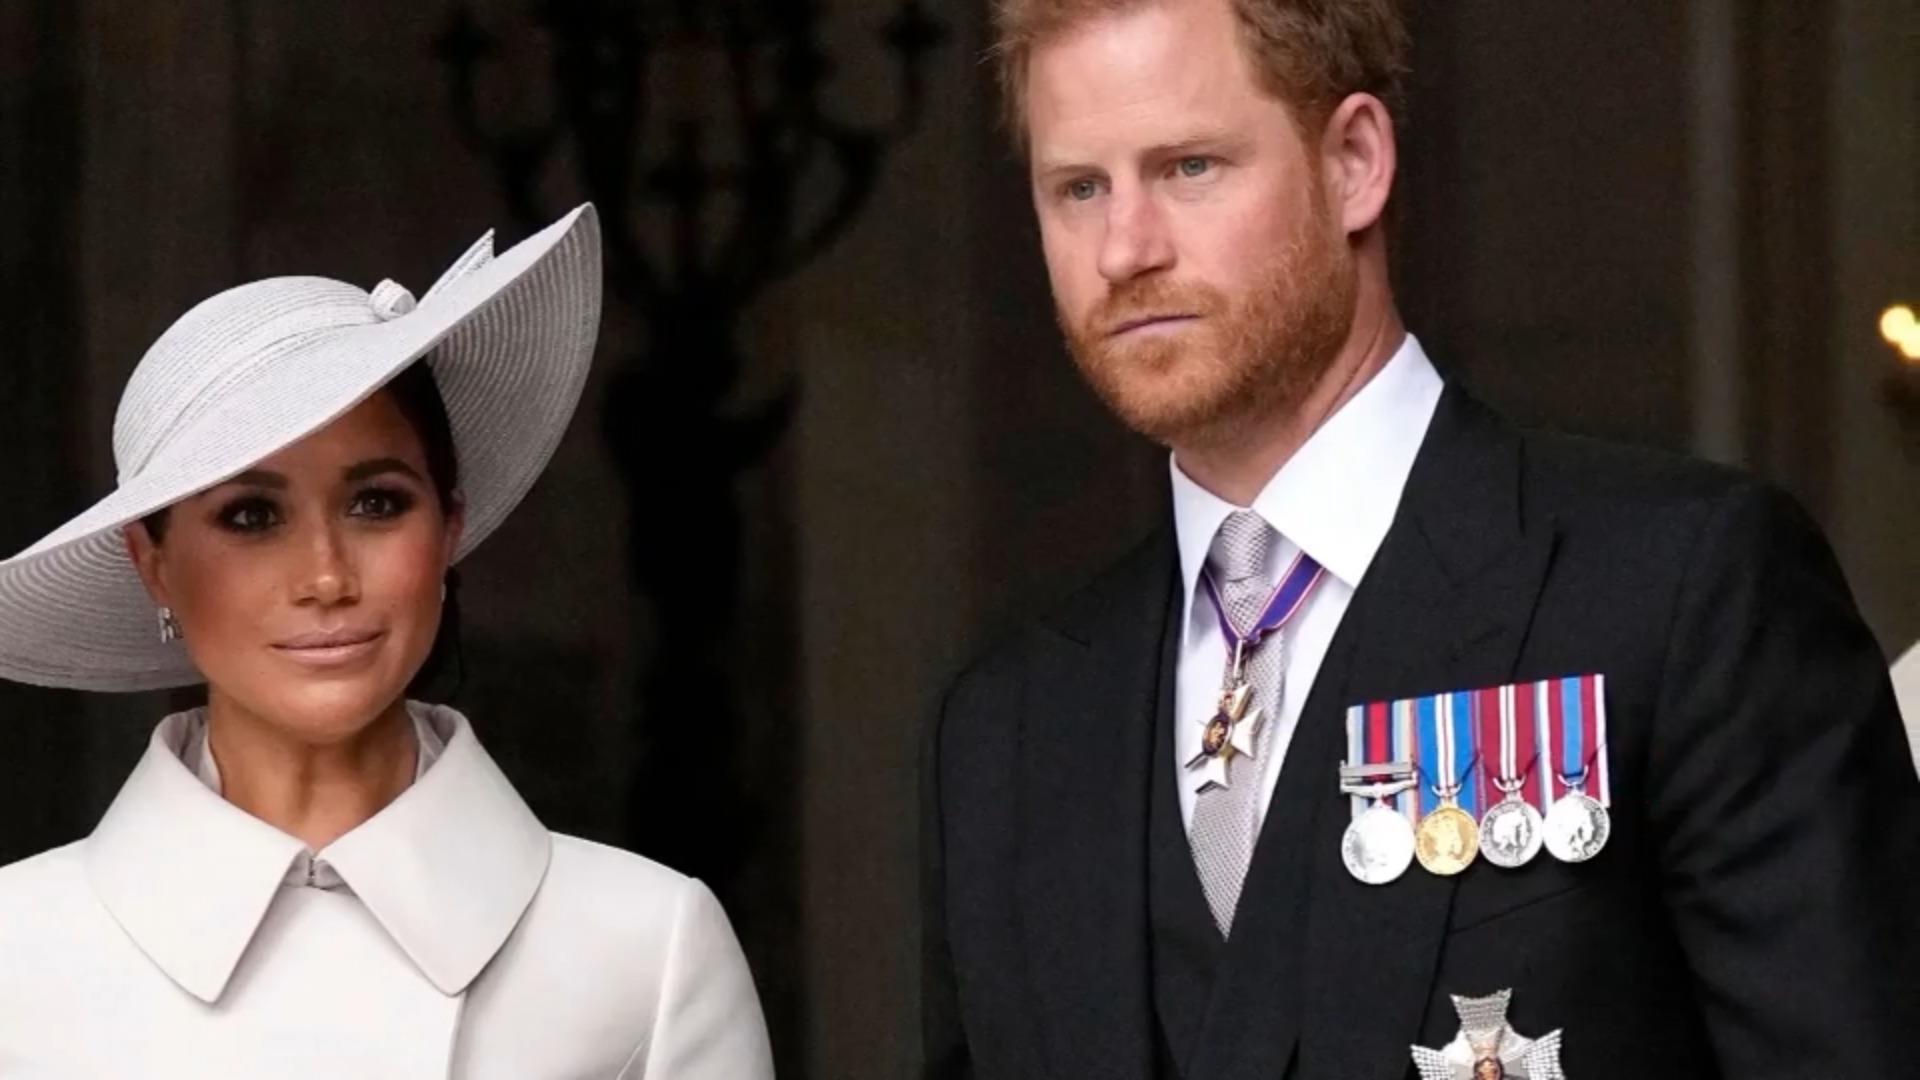 This press photo in Harry and Meghan's documentary is a fake doubt on credibility